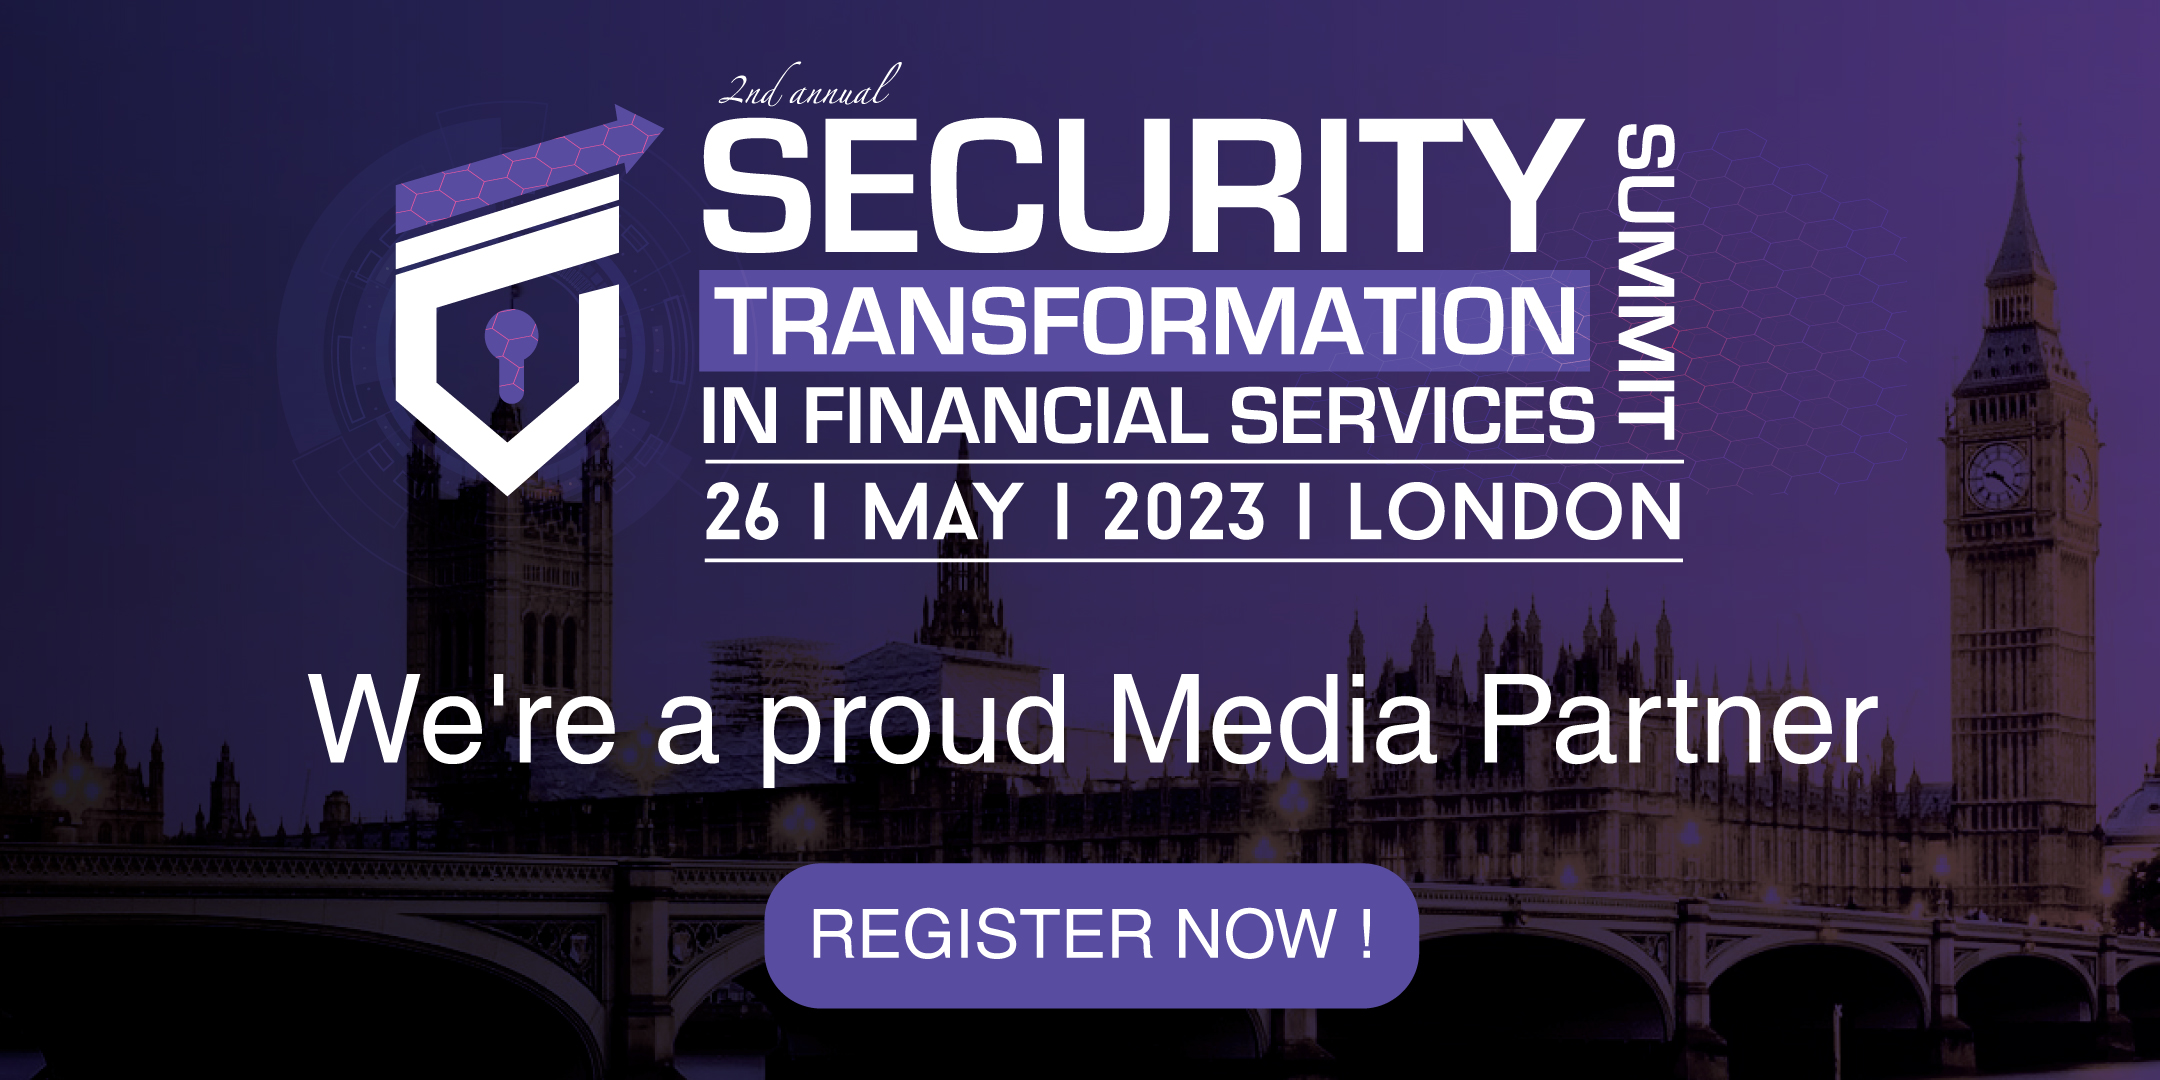 SECURITY TRANSFORMATION IN FINANCIAL SERVICES SUMMIT, London, United Kingdom